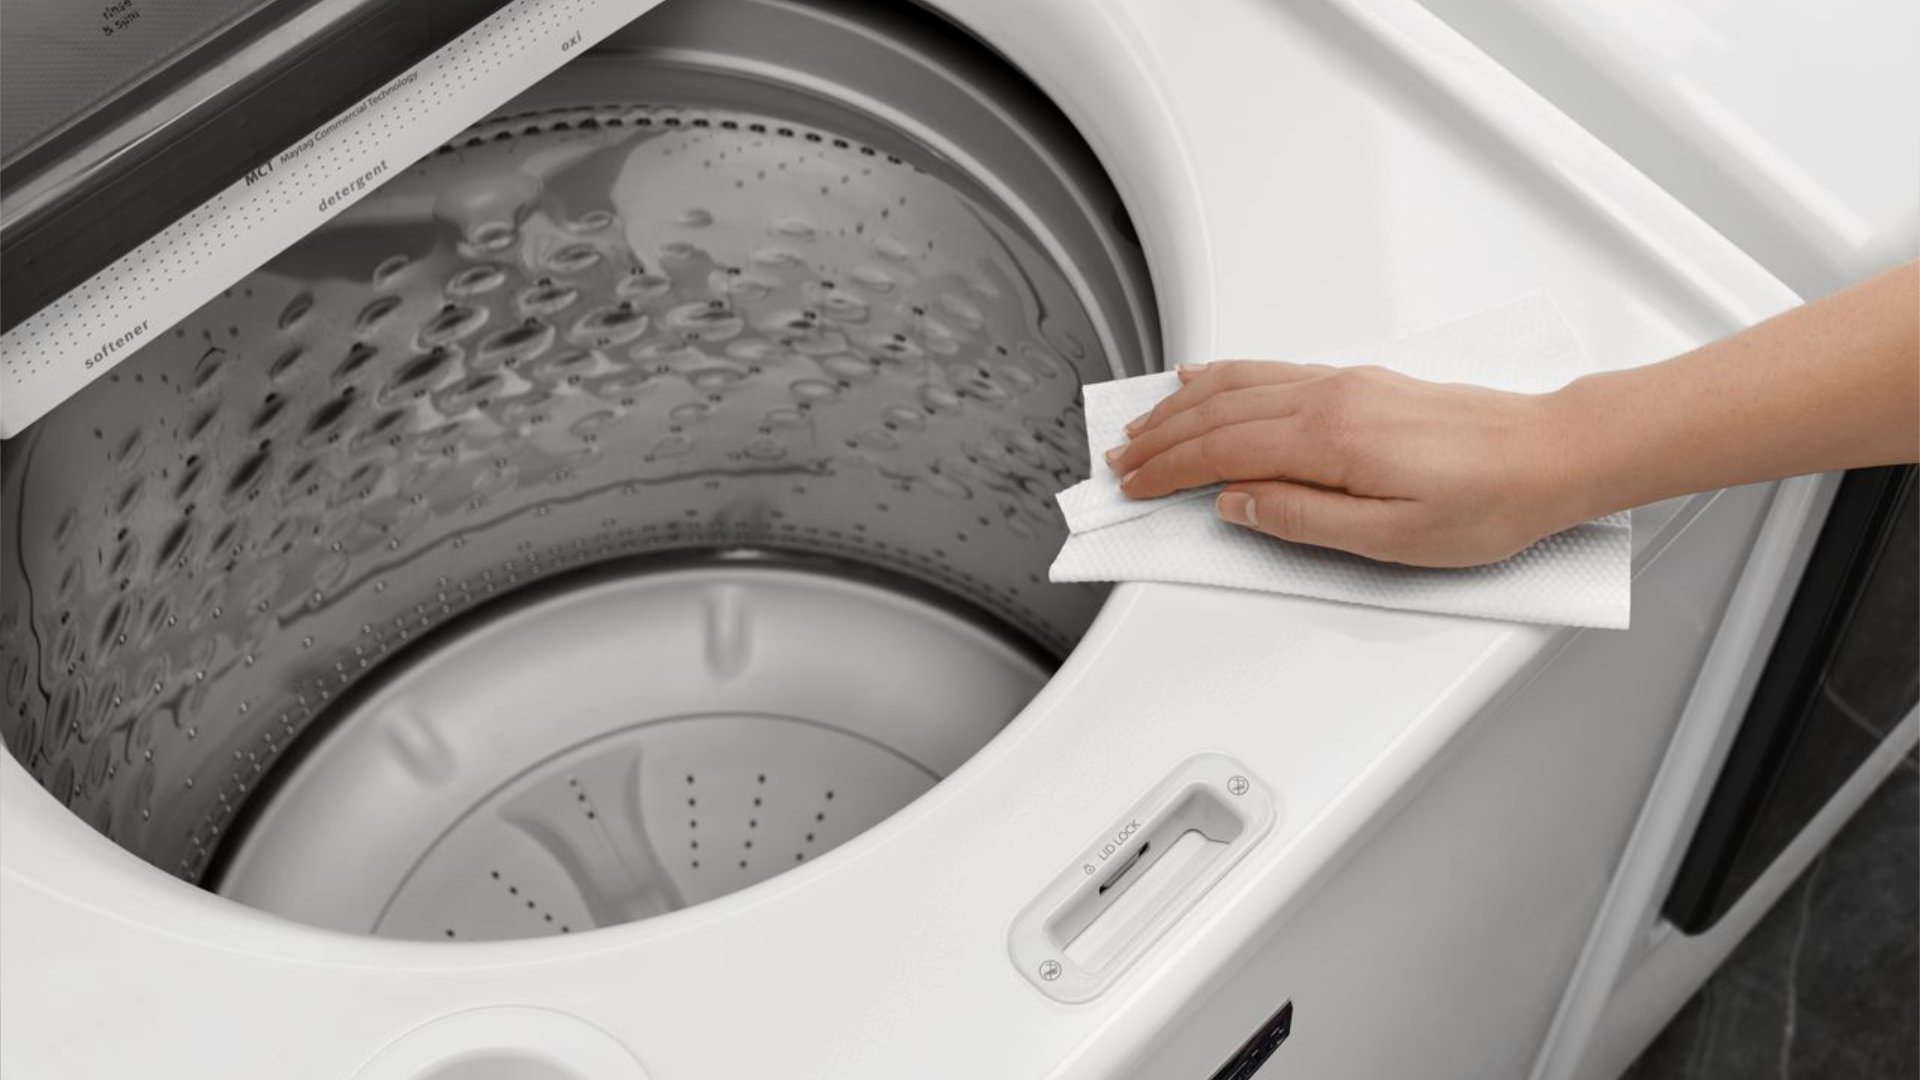 Affresh Washing Machine Cleaner & Cleans Front Load and Top Load Washers.